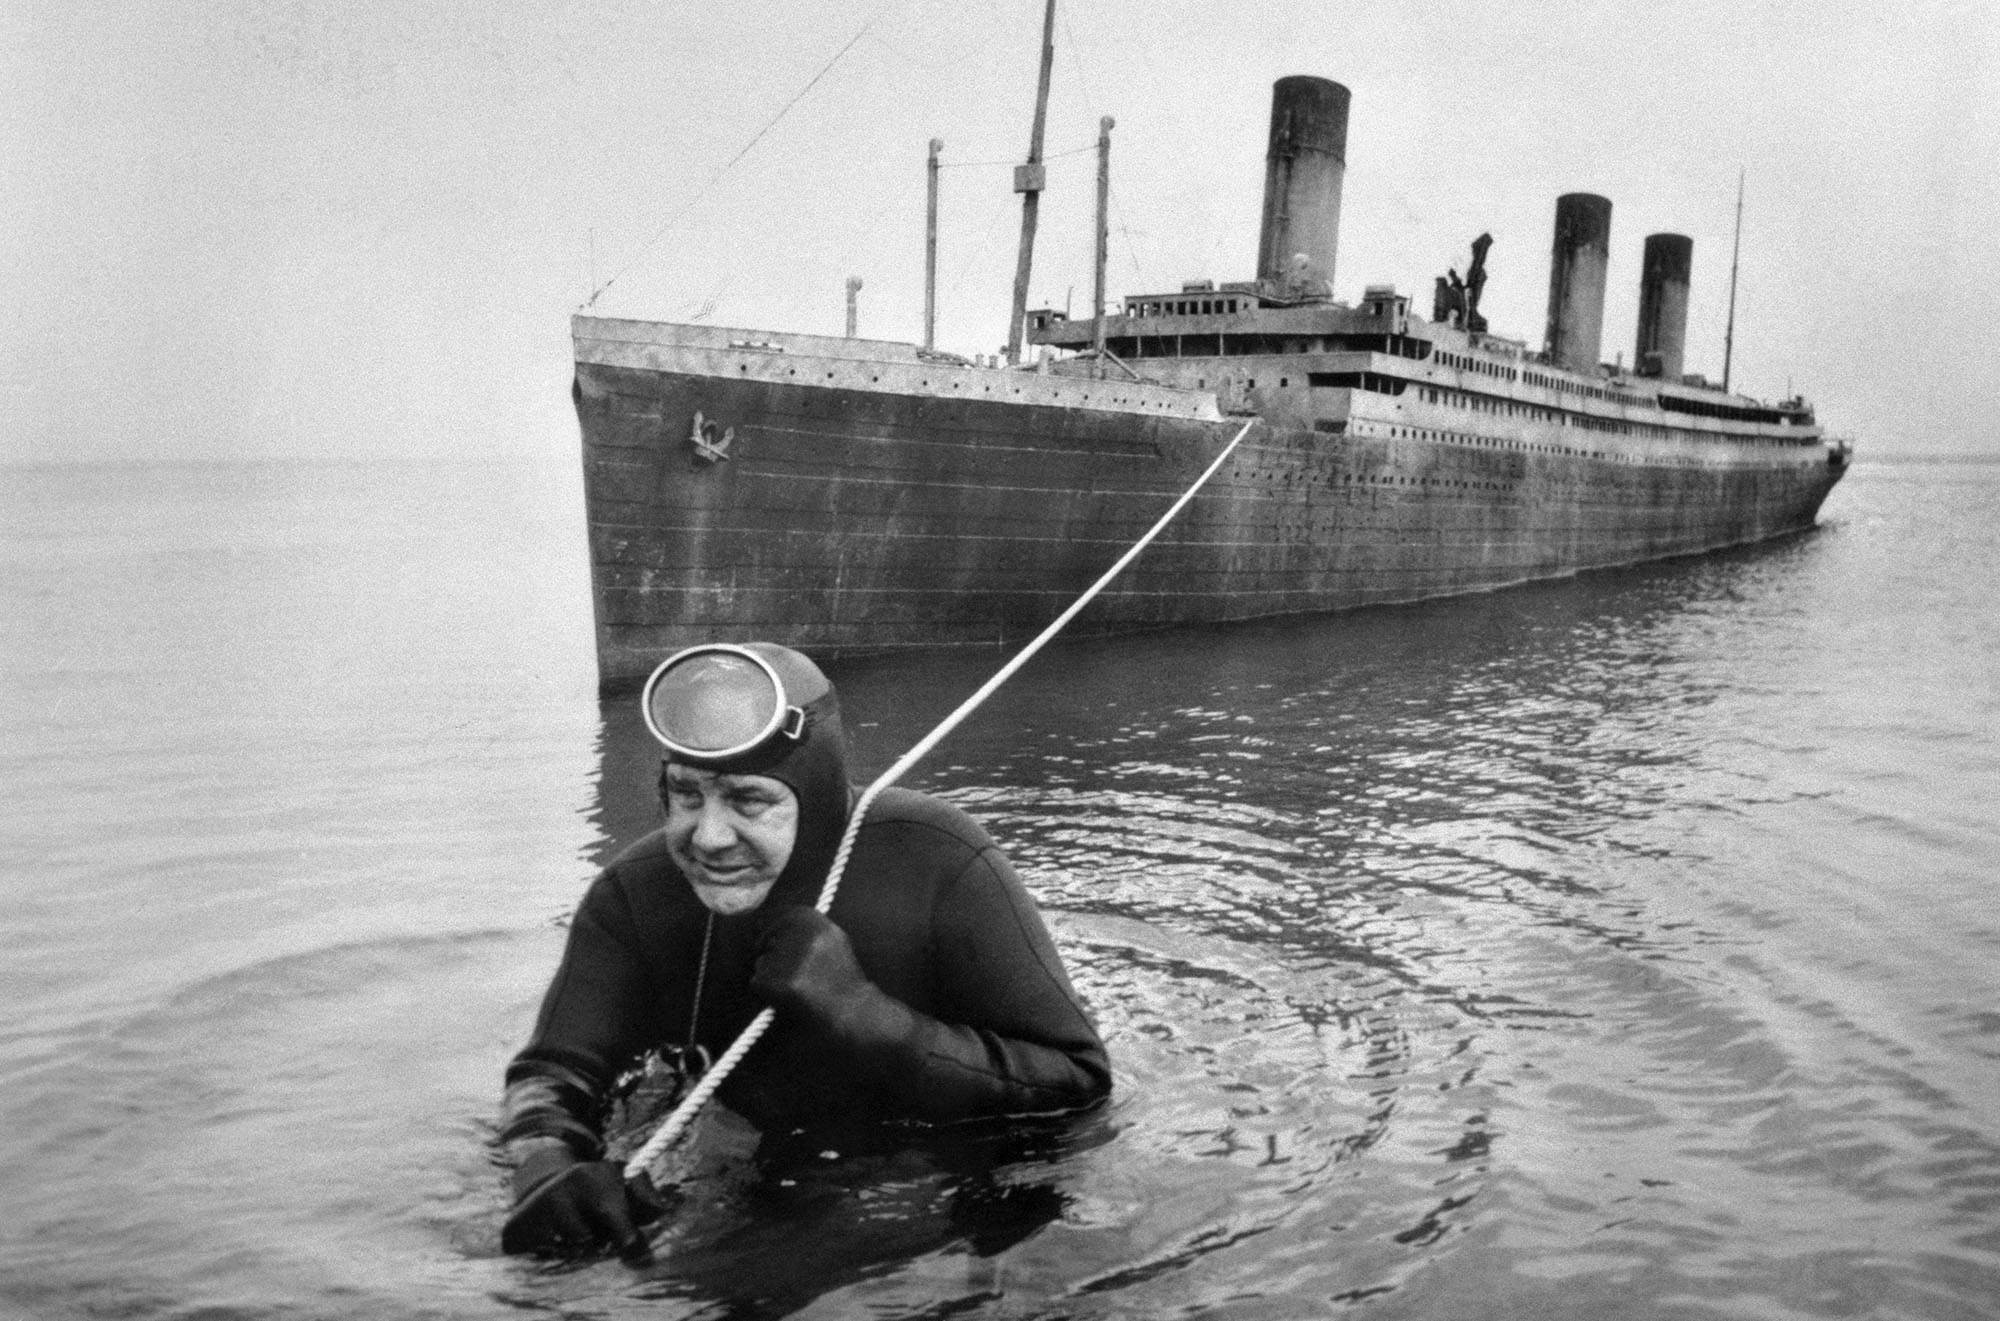 Professional frogman Courtney Brown tows a 55-foot scale model of the Titanic during work on the film "Raise the Titanic!", 1980